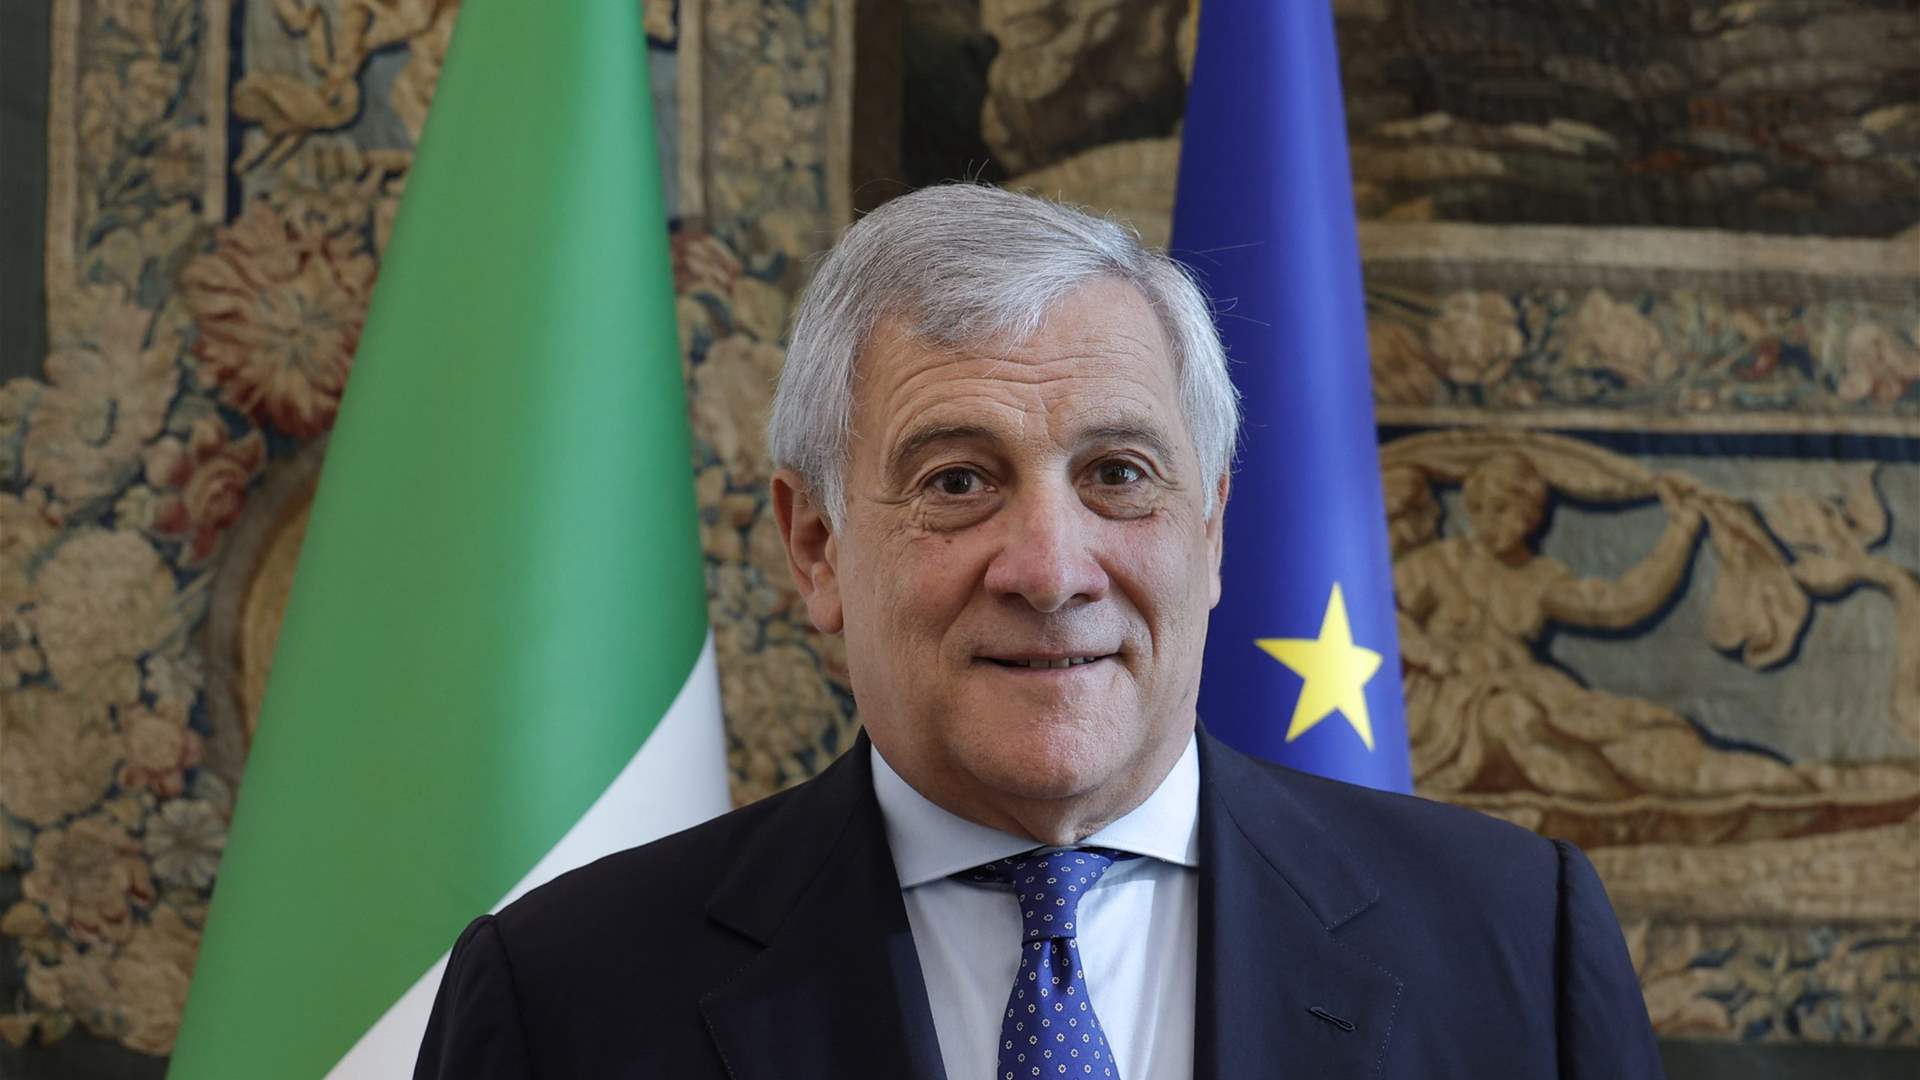 Italy considers Israel&#39;s response to Hamas &#39;disproportionate&#39;